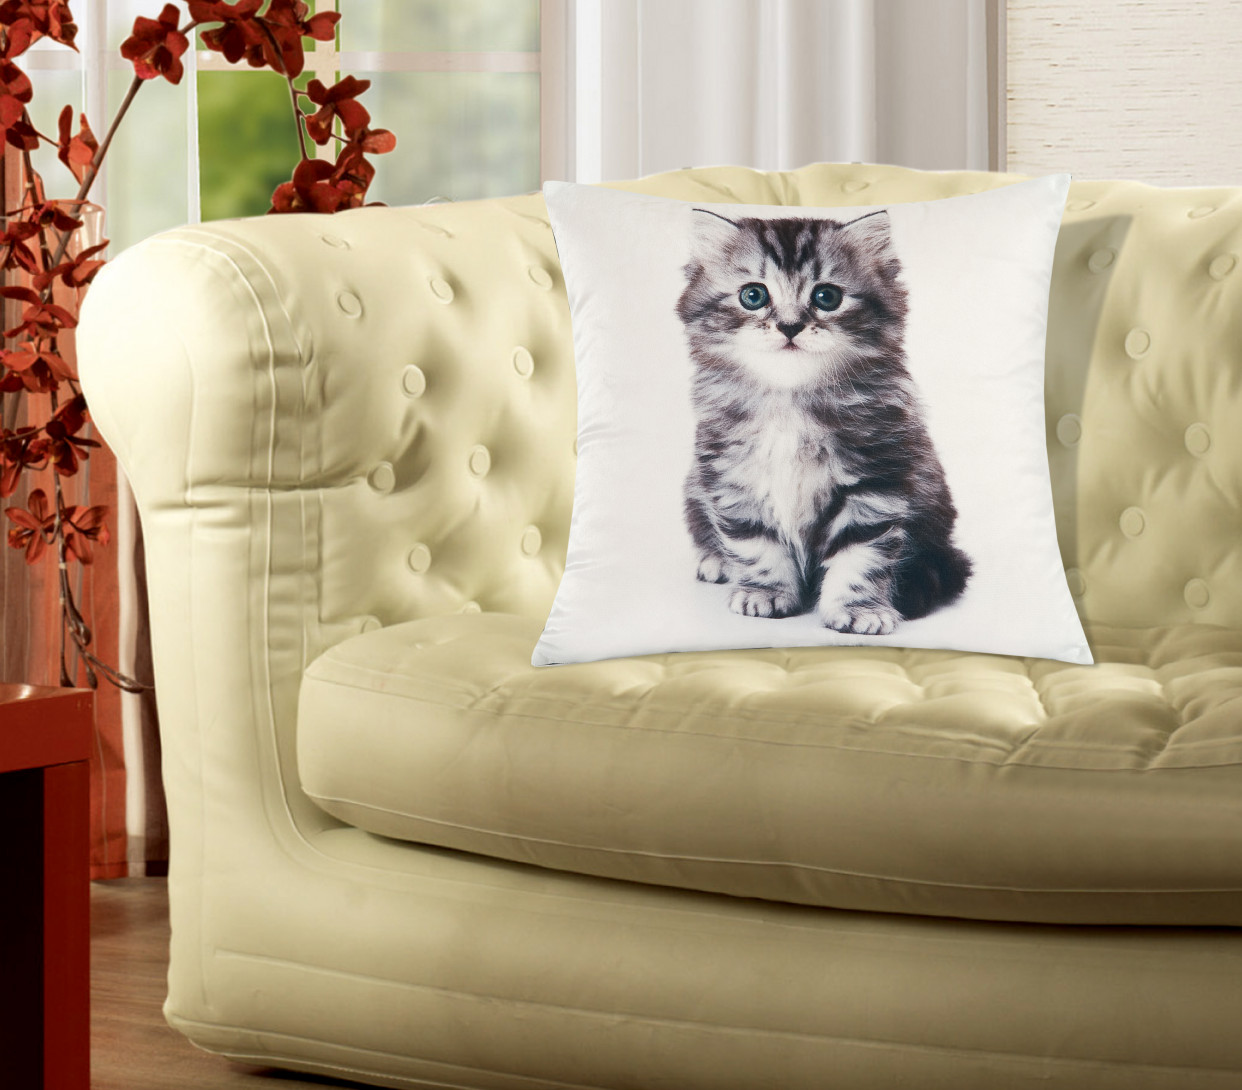 Soft Animal Cushion Cover 45 x 45cm Unfilled - Kitten>